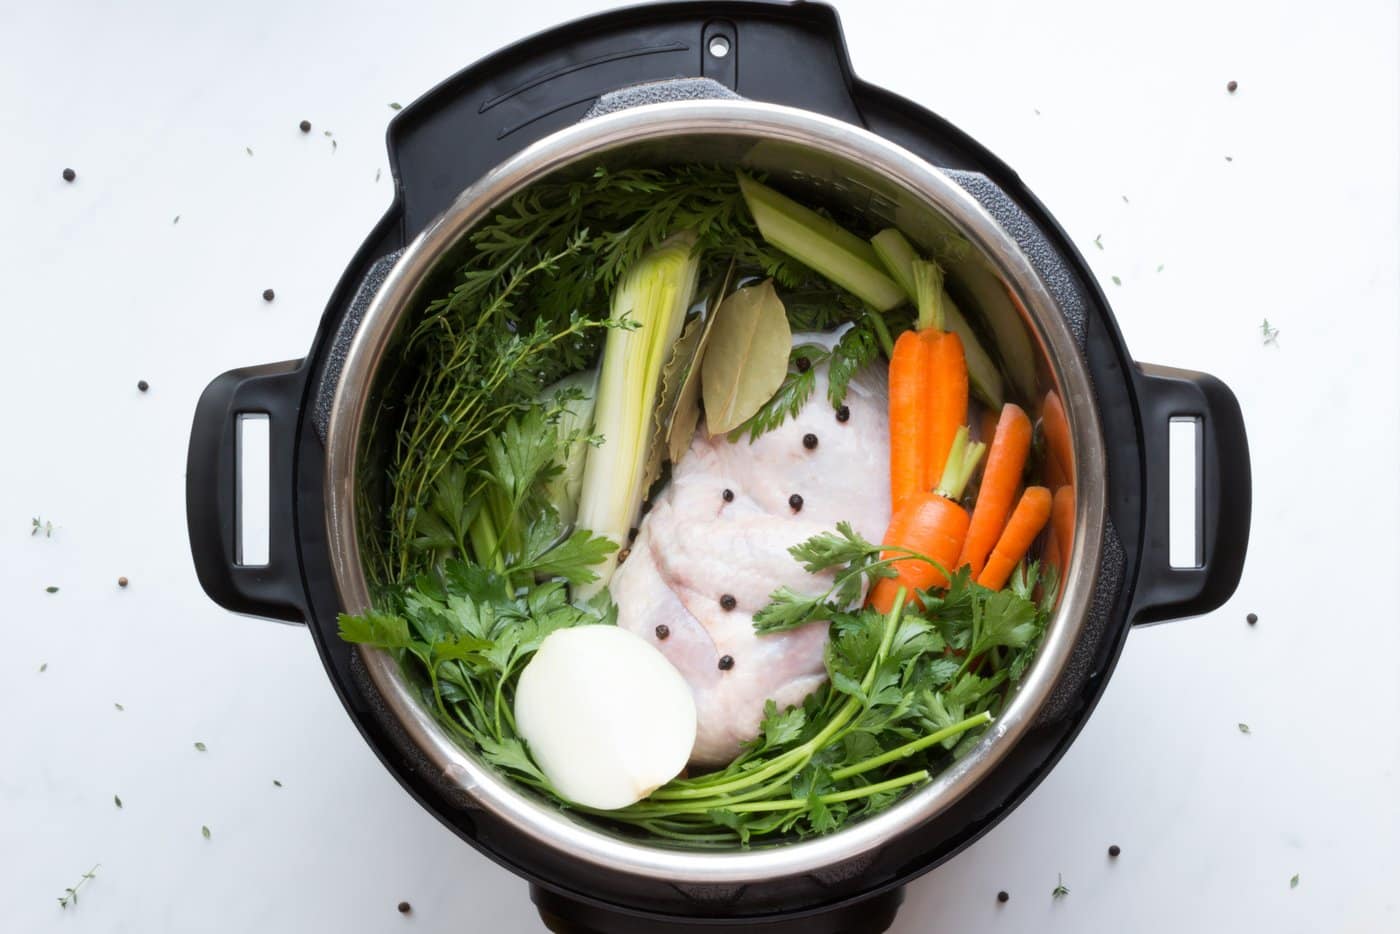 Instant pot electronic slow cooker with chicken and vegetables